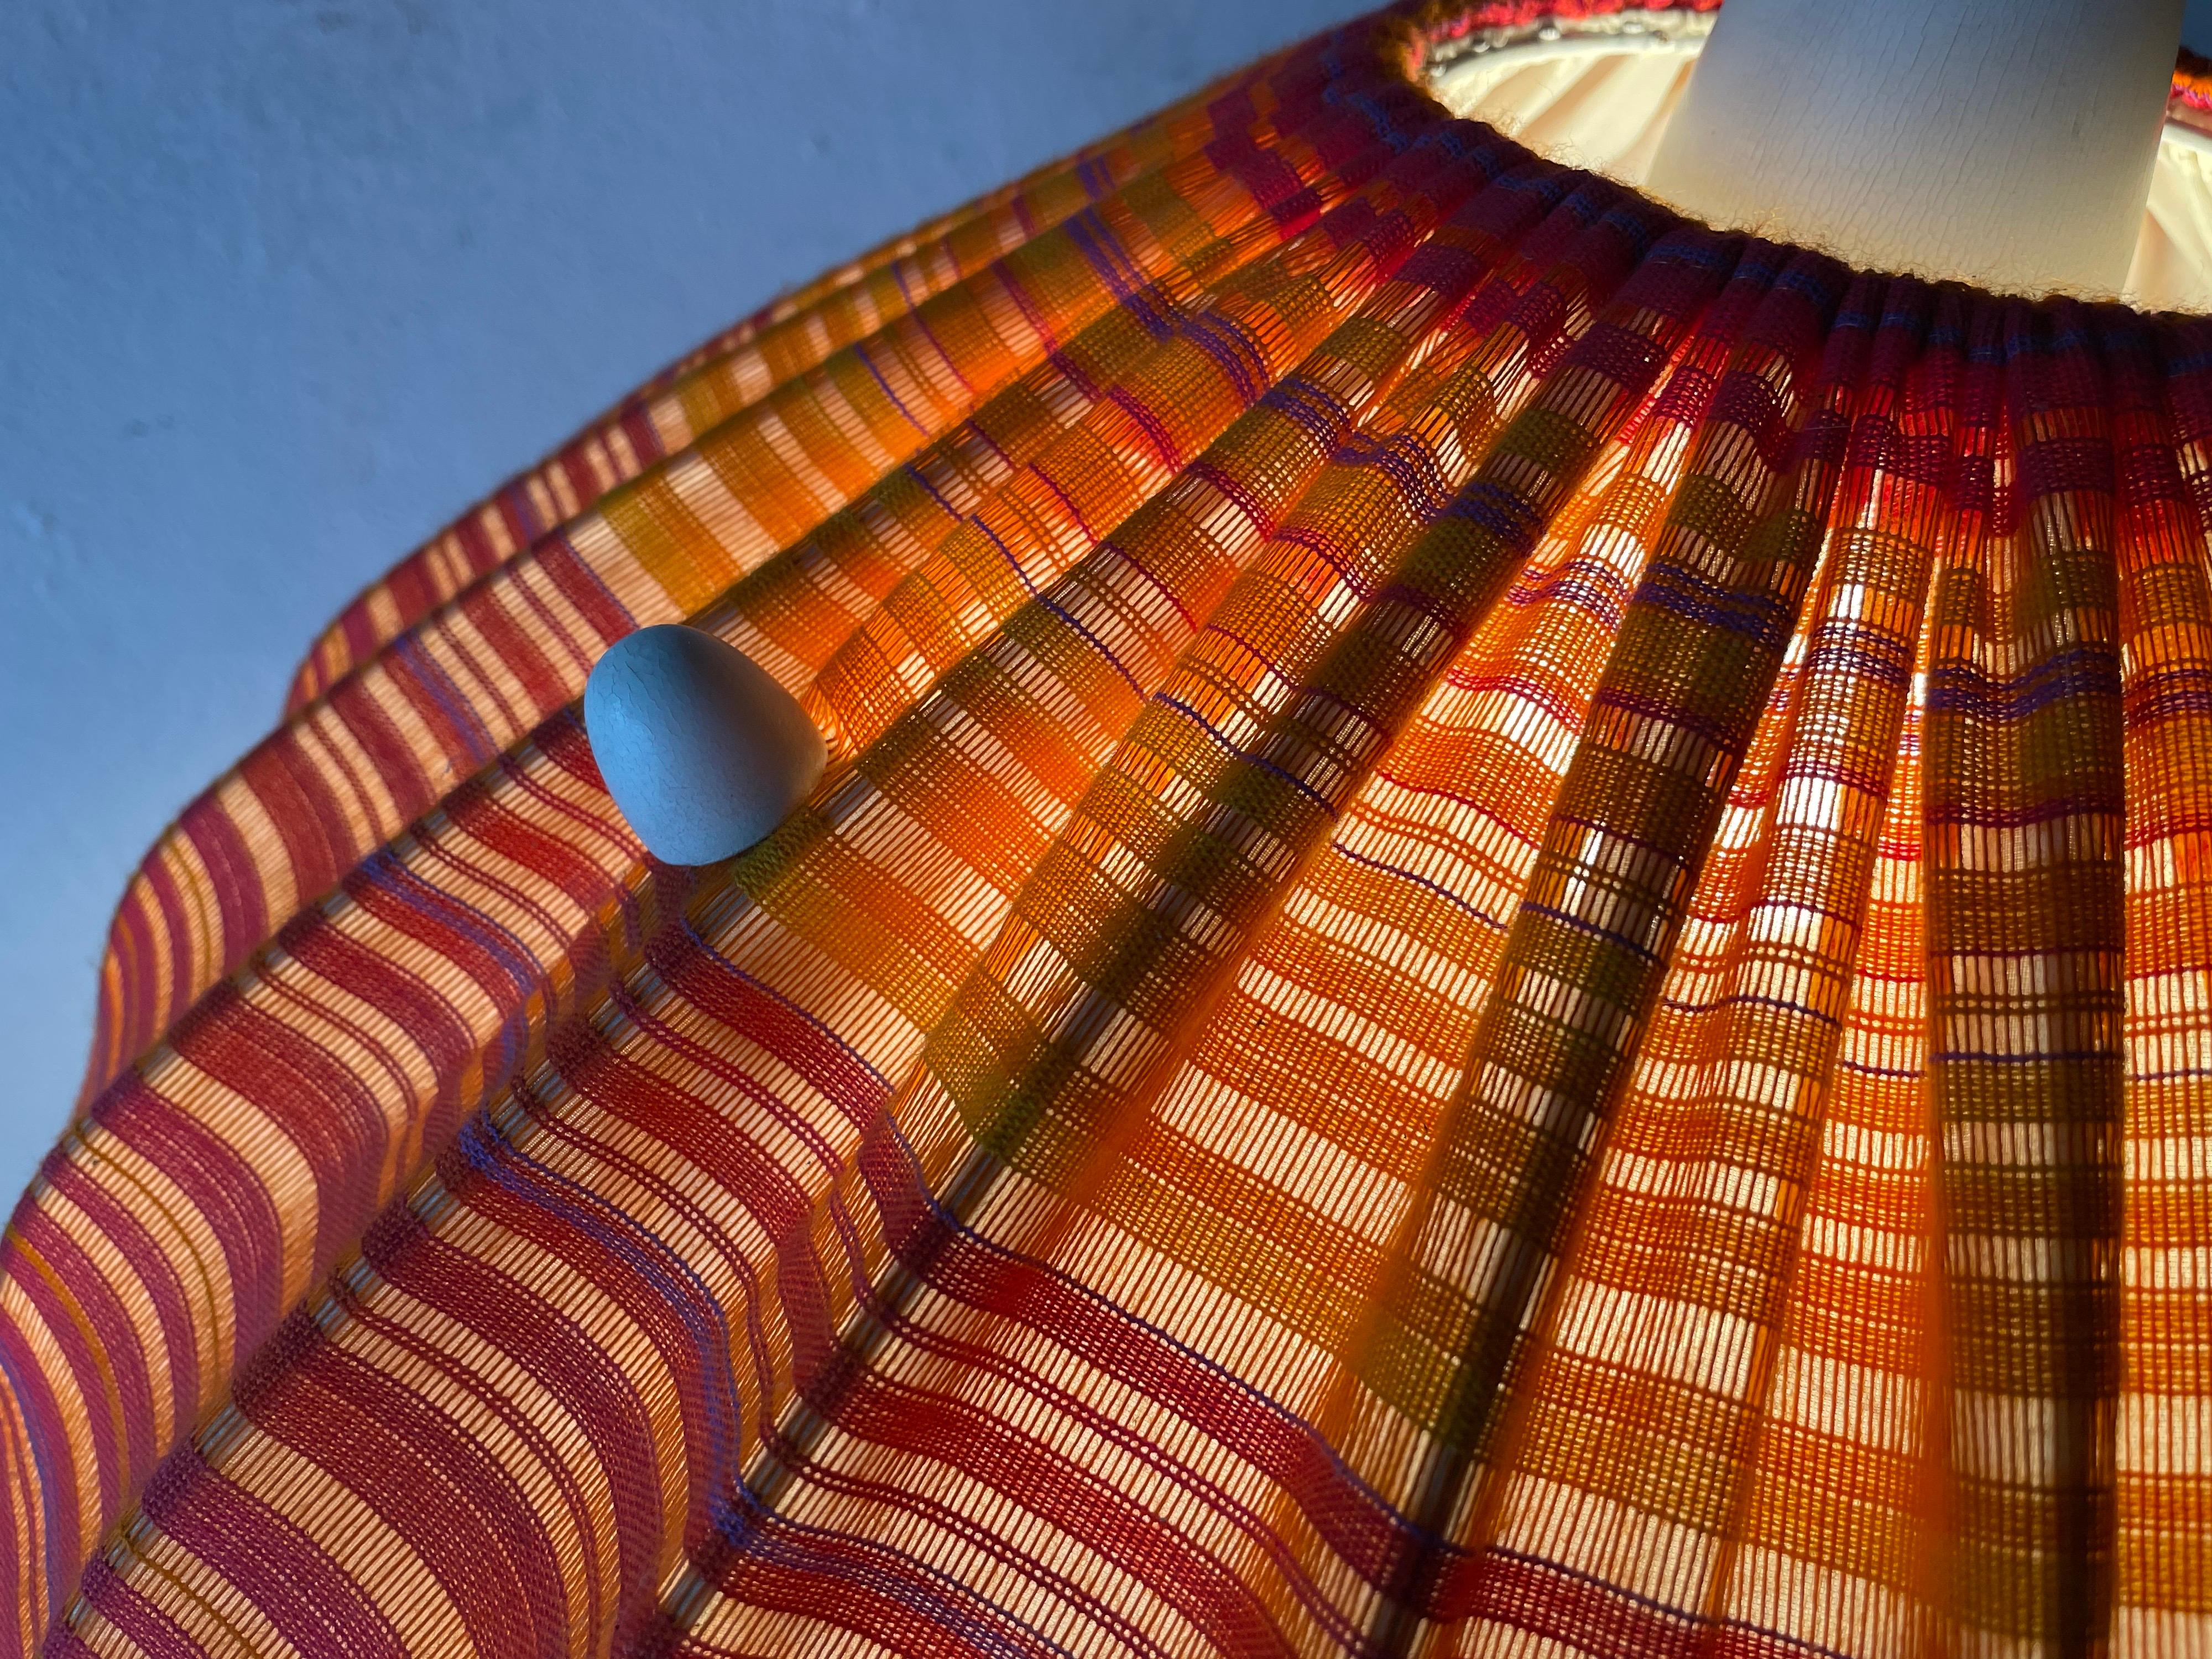 Fabric Shade & Wood Large Pendant Lamp by Temde, 1960s, Germany For Sale 12